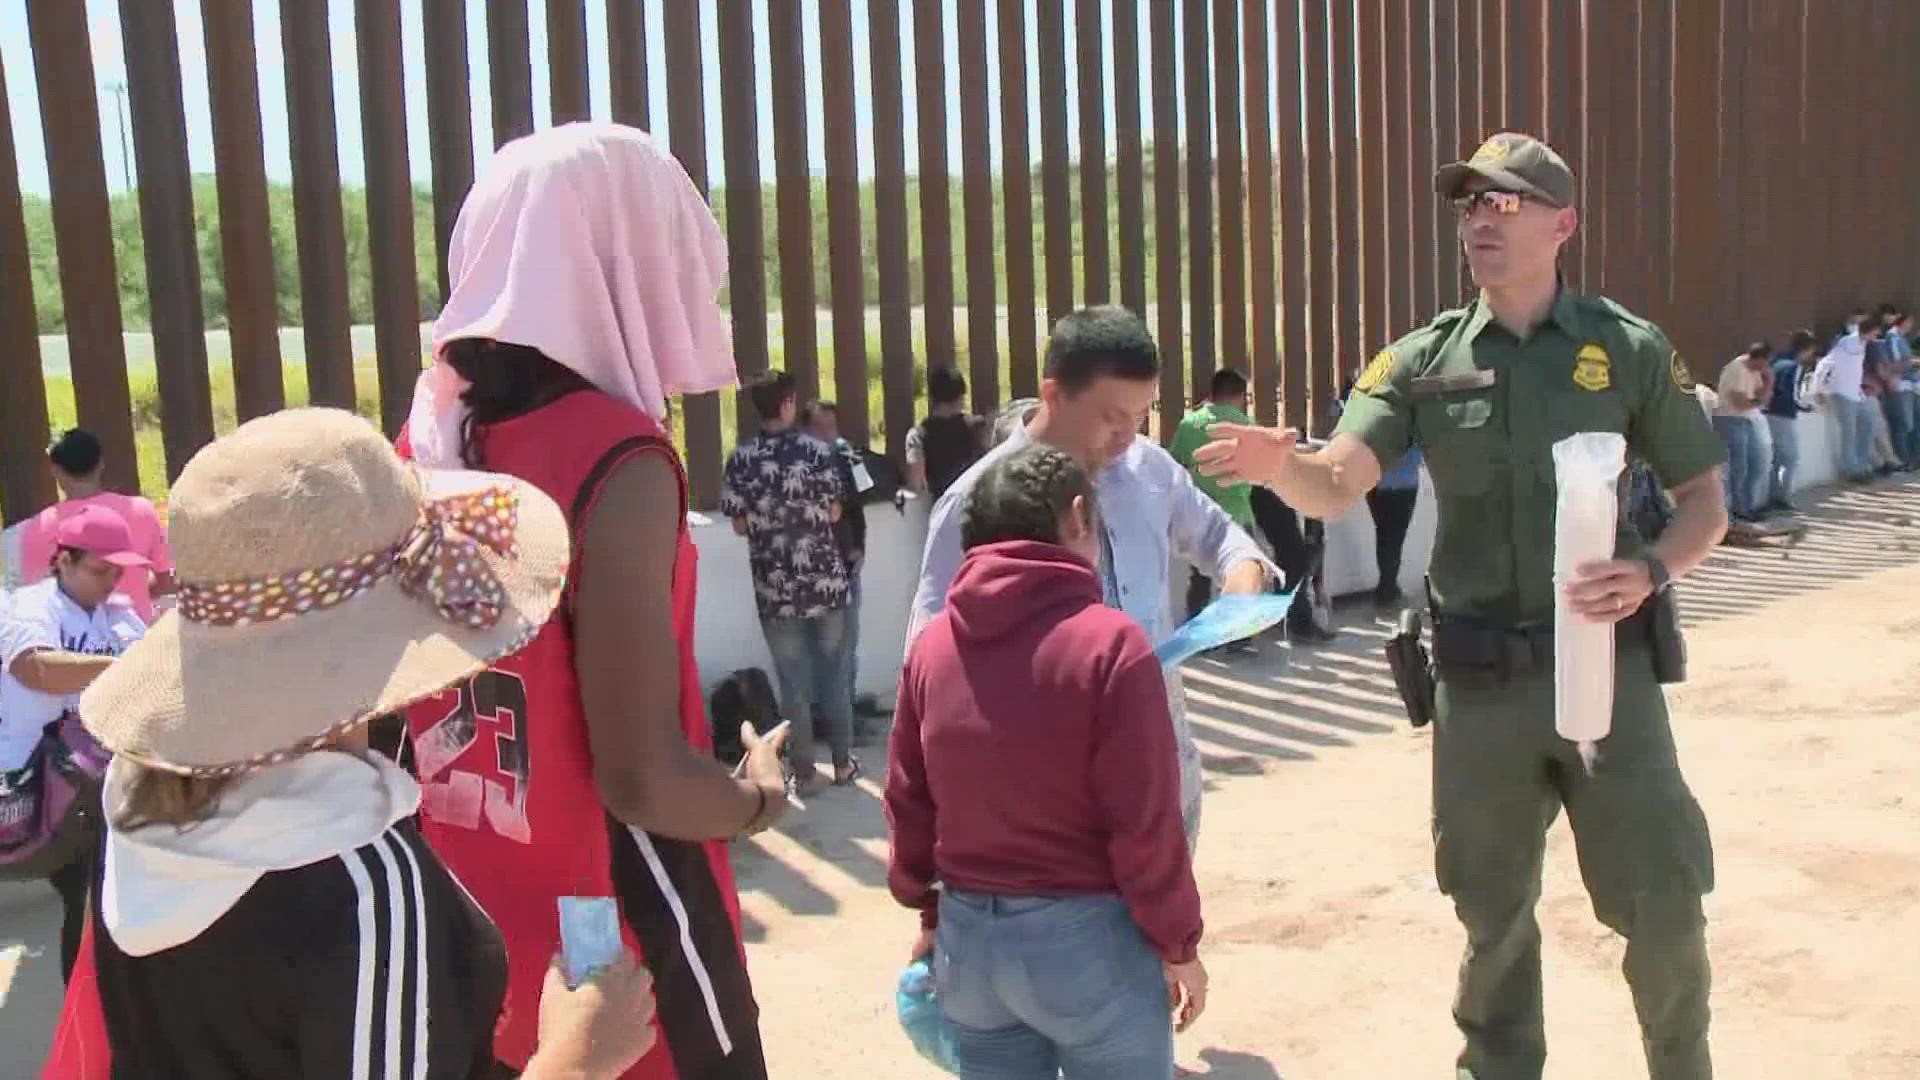 Border Patrol officials said groups of 300 to 500 have been coming across the border in the area.